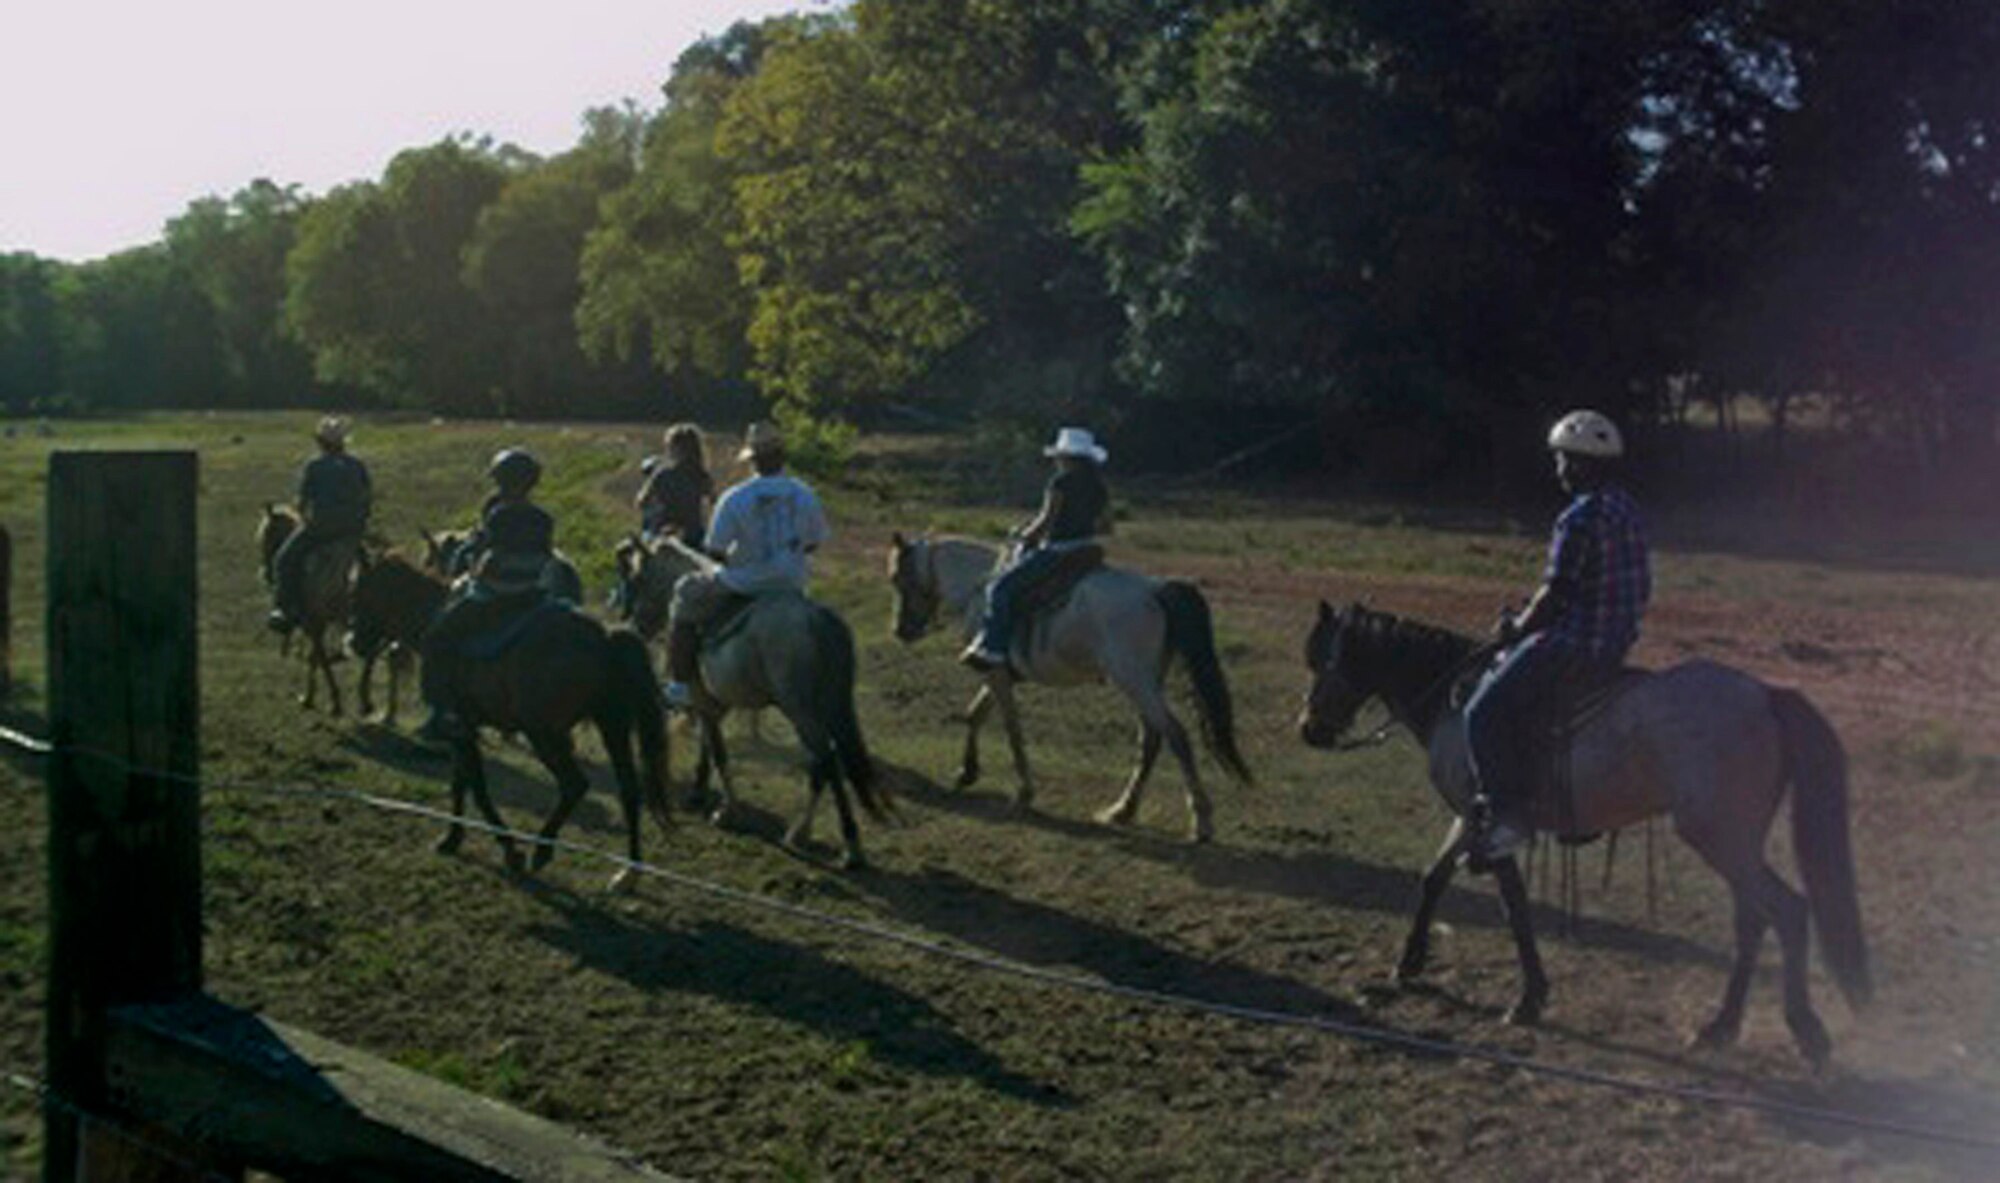 Team Barksdale members ride horseback during a 2011 trip to Karma Farms in Marshall, Texas. Barksdale's Outdoor Recreation hosts numerous activities both on base and throughout the Ark-La-Tex. (Courtesy photo)(RELEASED)